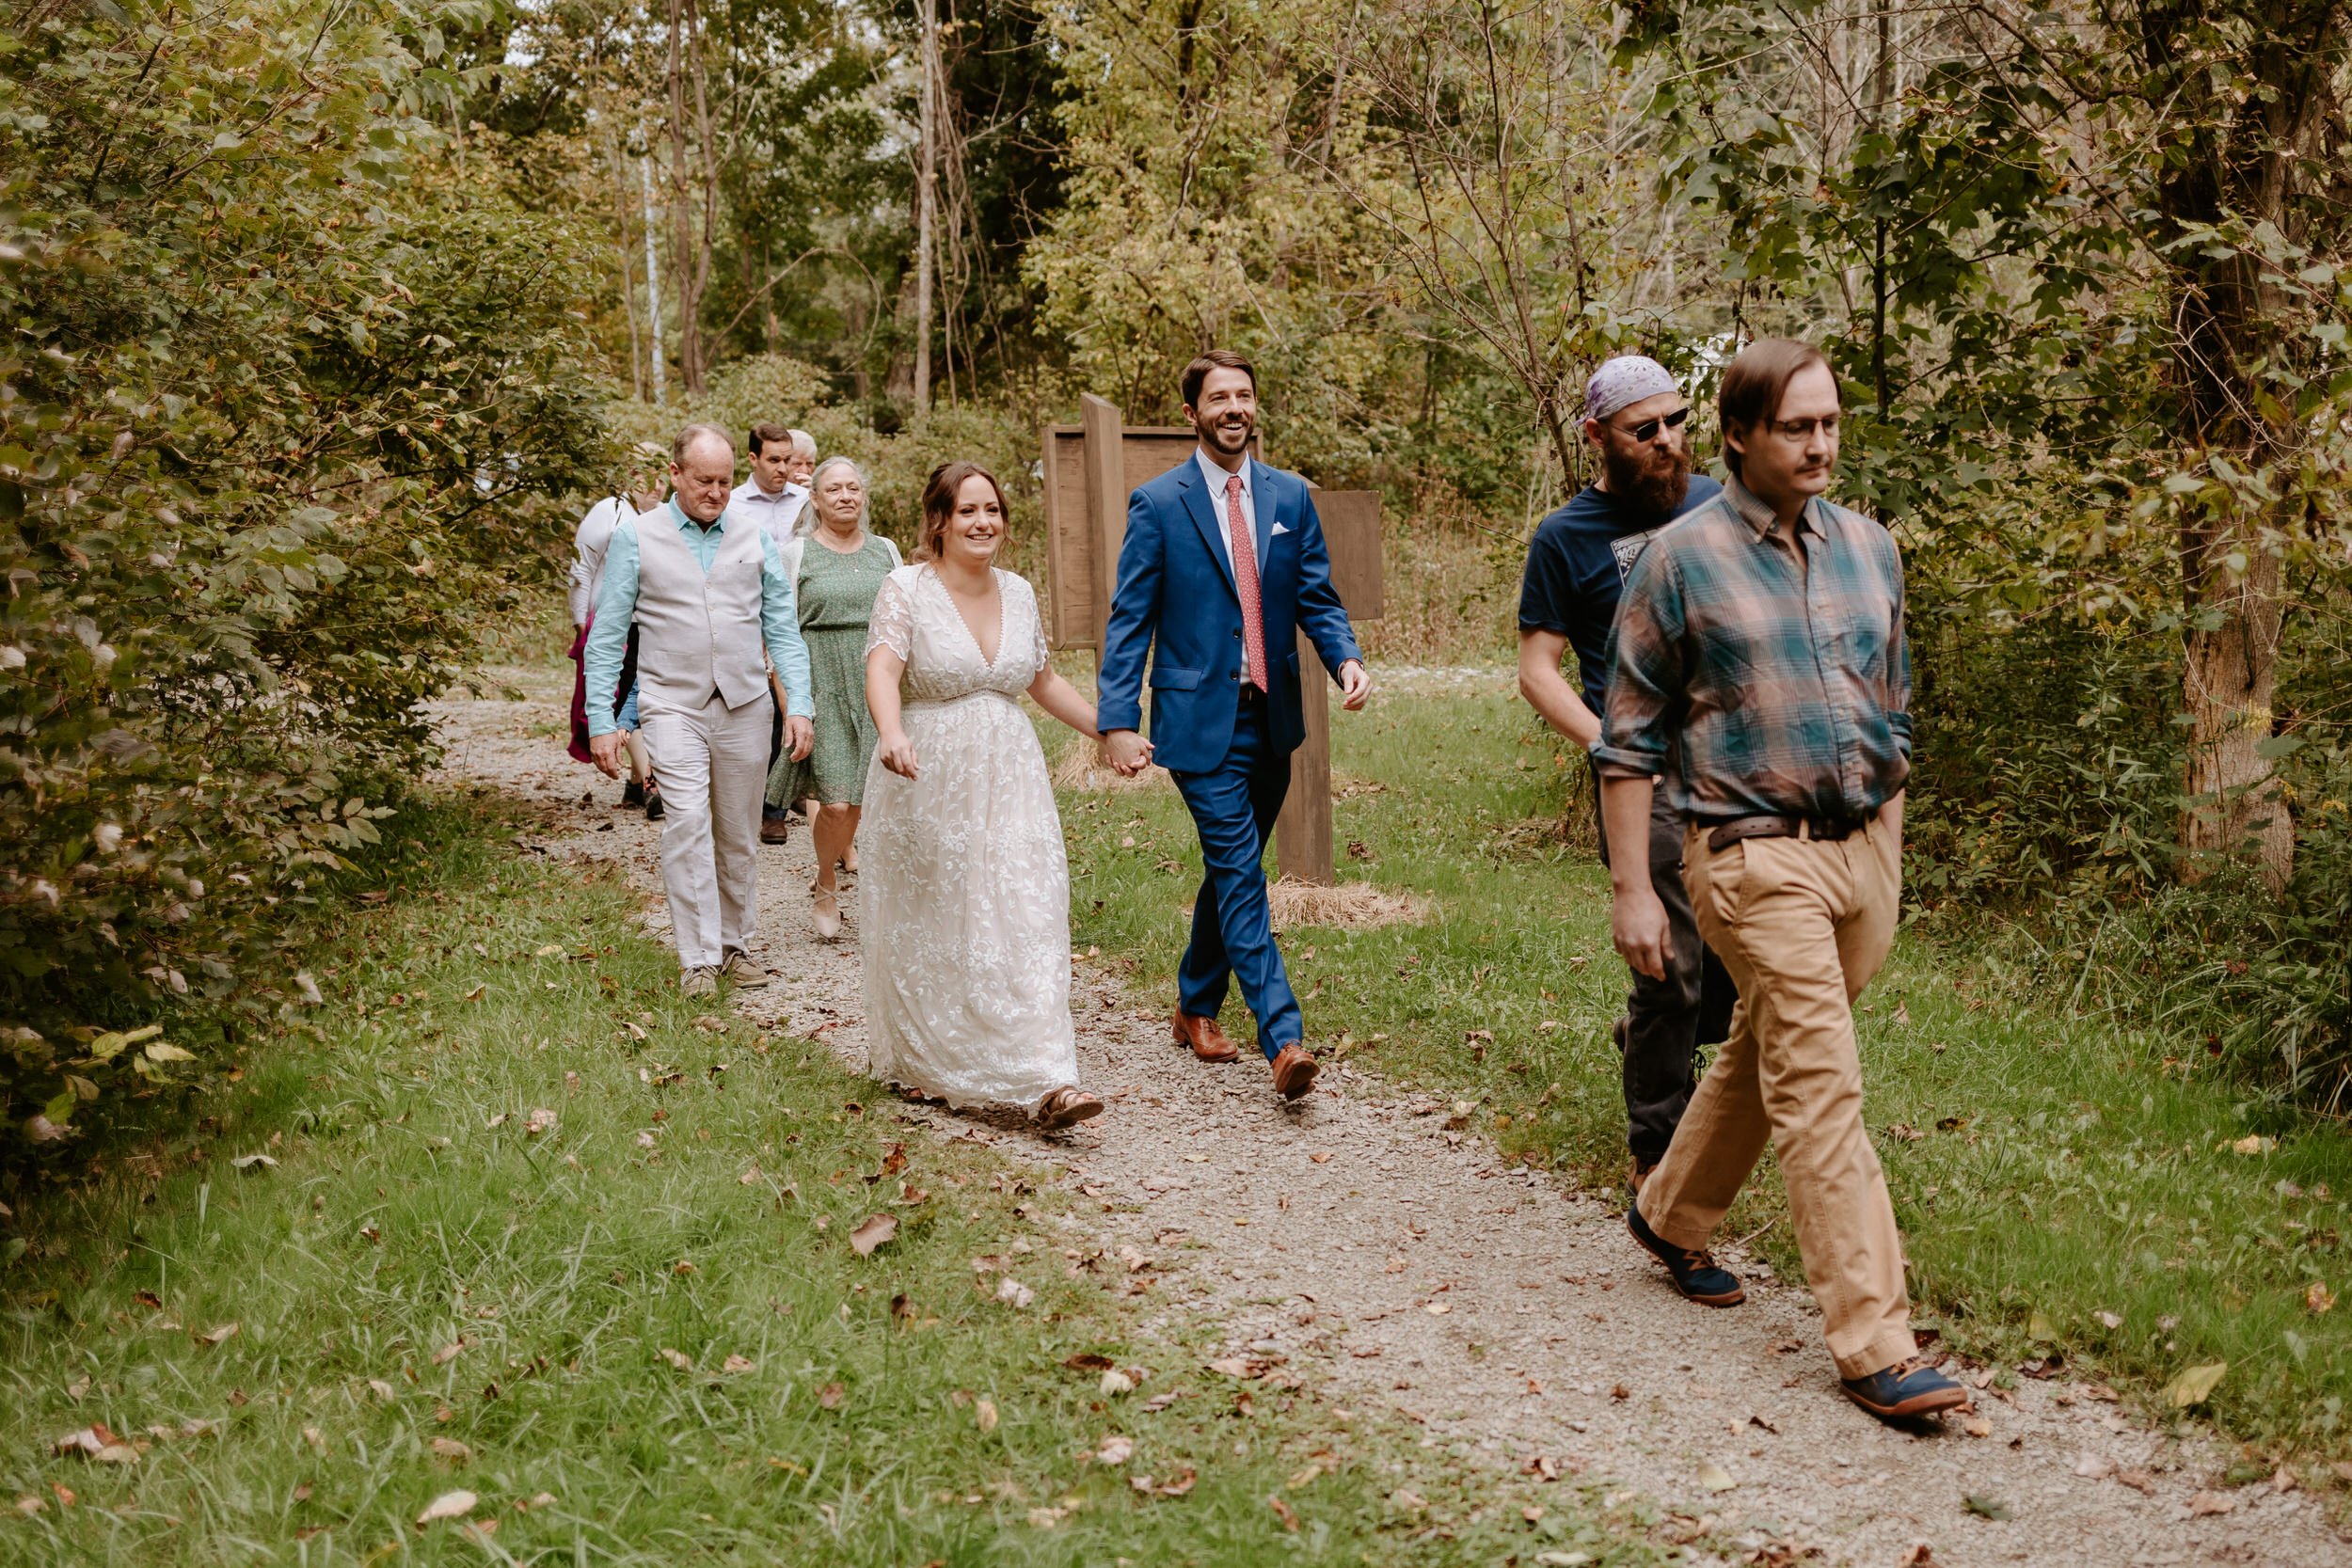 Couple and their families walk on trail for their elopement day.